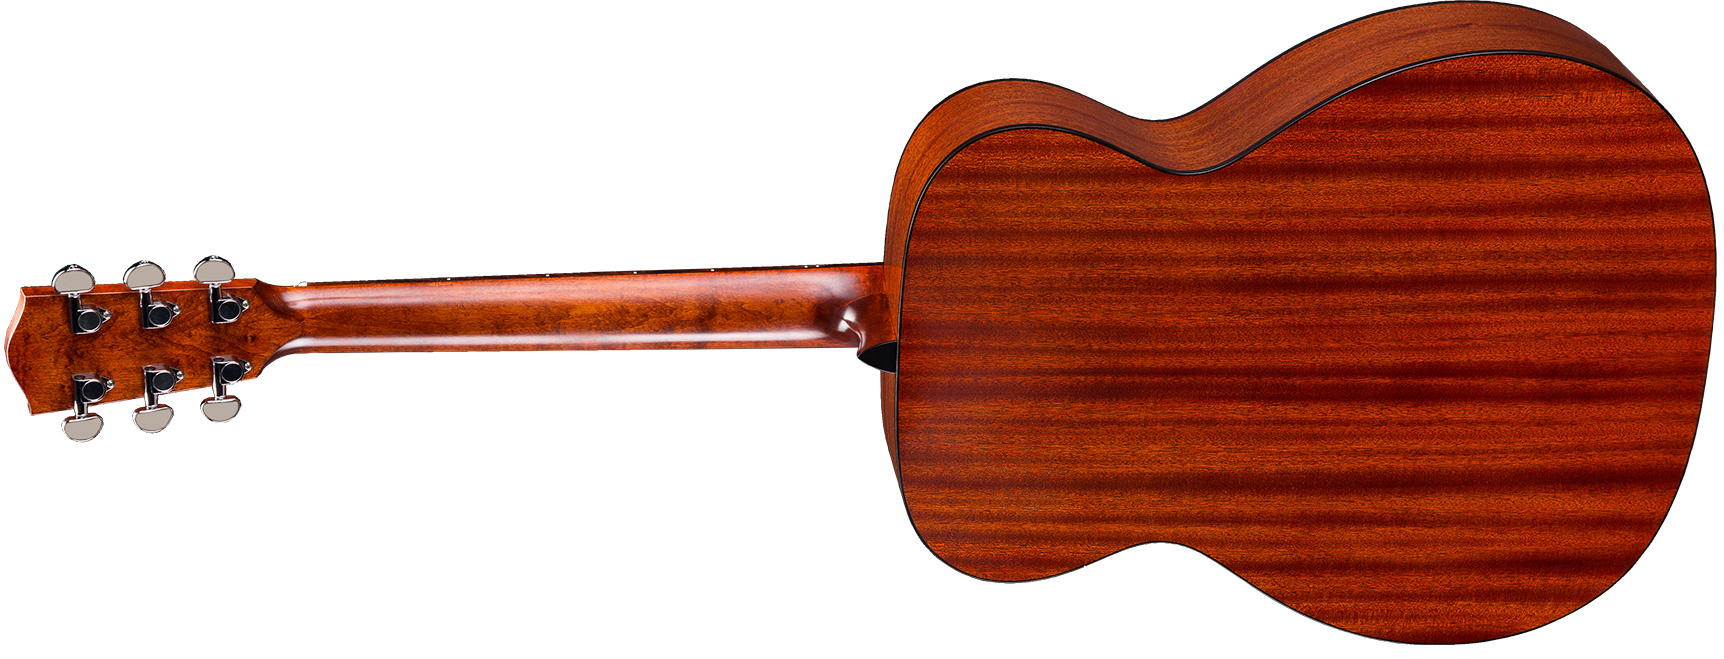 Eastman Pch1-om Orchestra Model Epicea Sapele Rw - Natural Satin - Acoustic guitar & electro - Variation 1